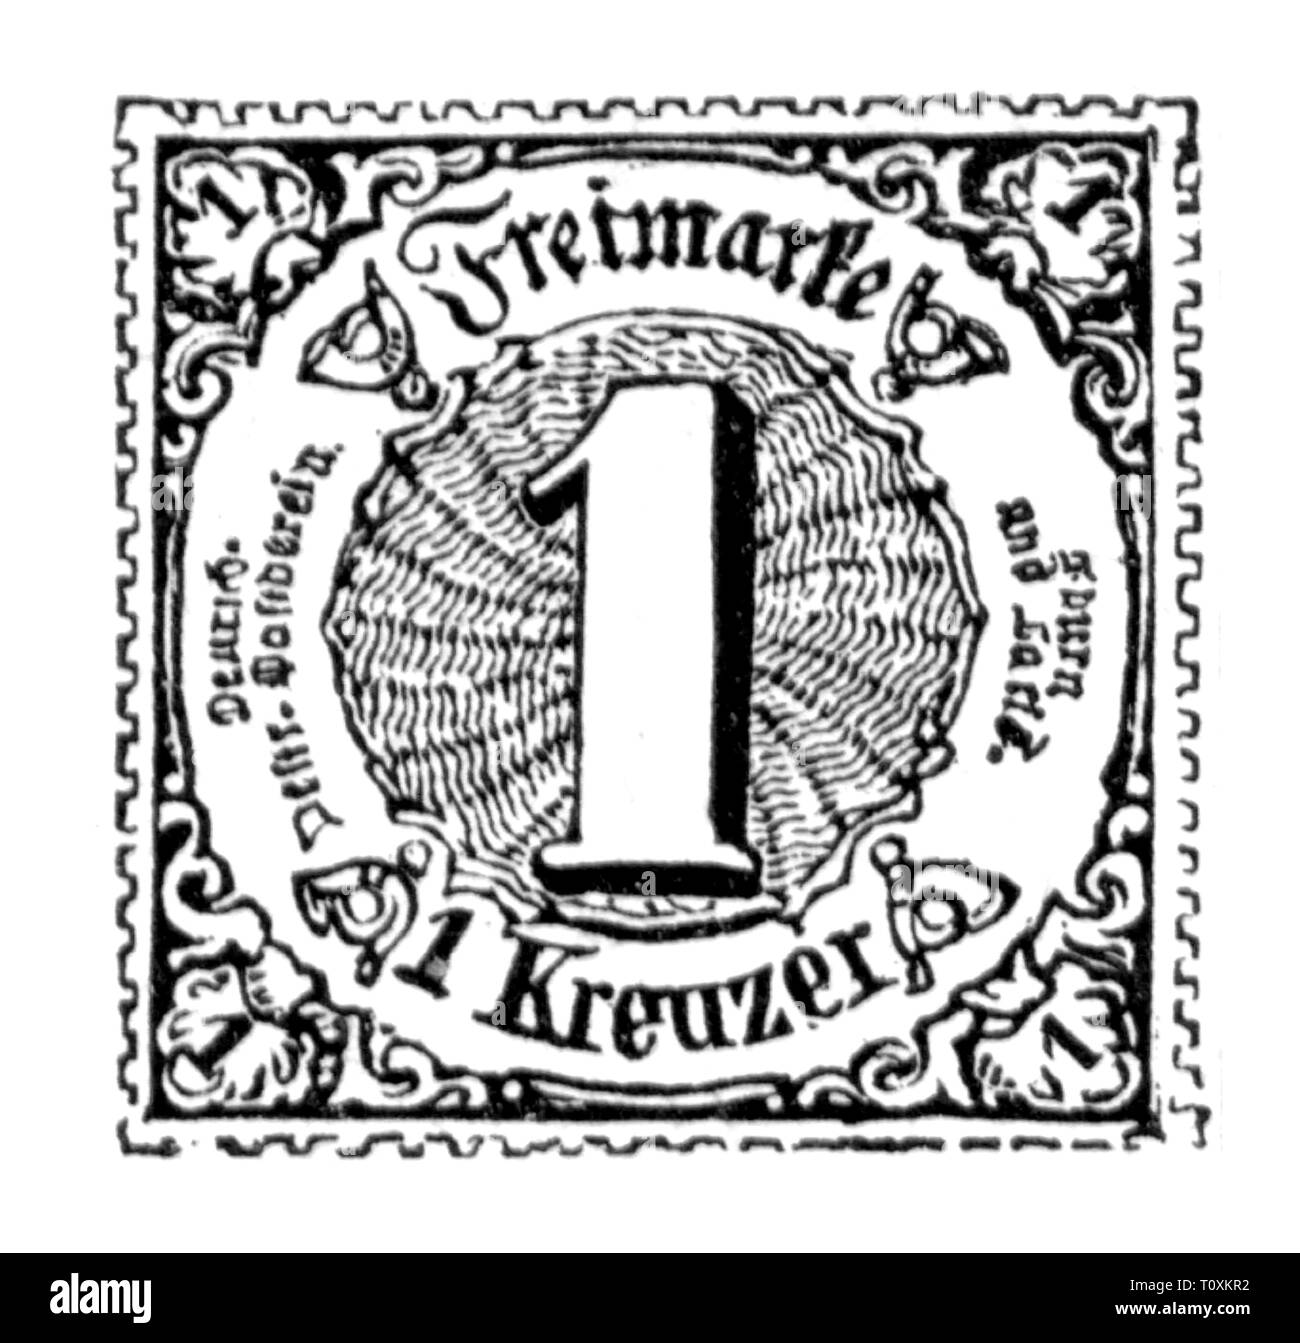 Mail, francobolli, Germania, Thurn-und-Taxis-Post, 1 Kreuzer francobollo, quartiere meridionale, 1865, Additional-Rights-Clearance-Info-Not-Available Foto Stock